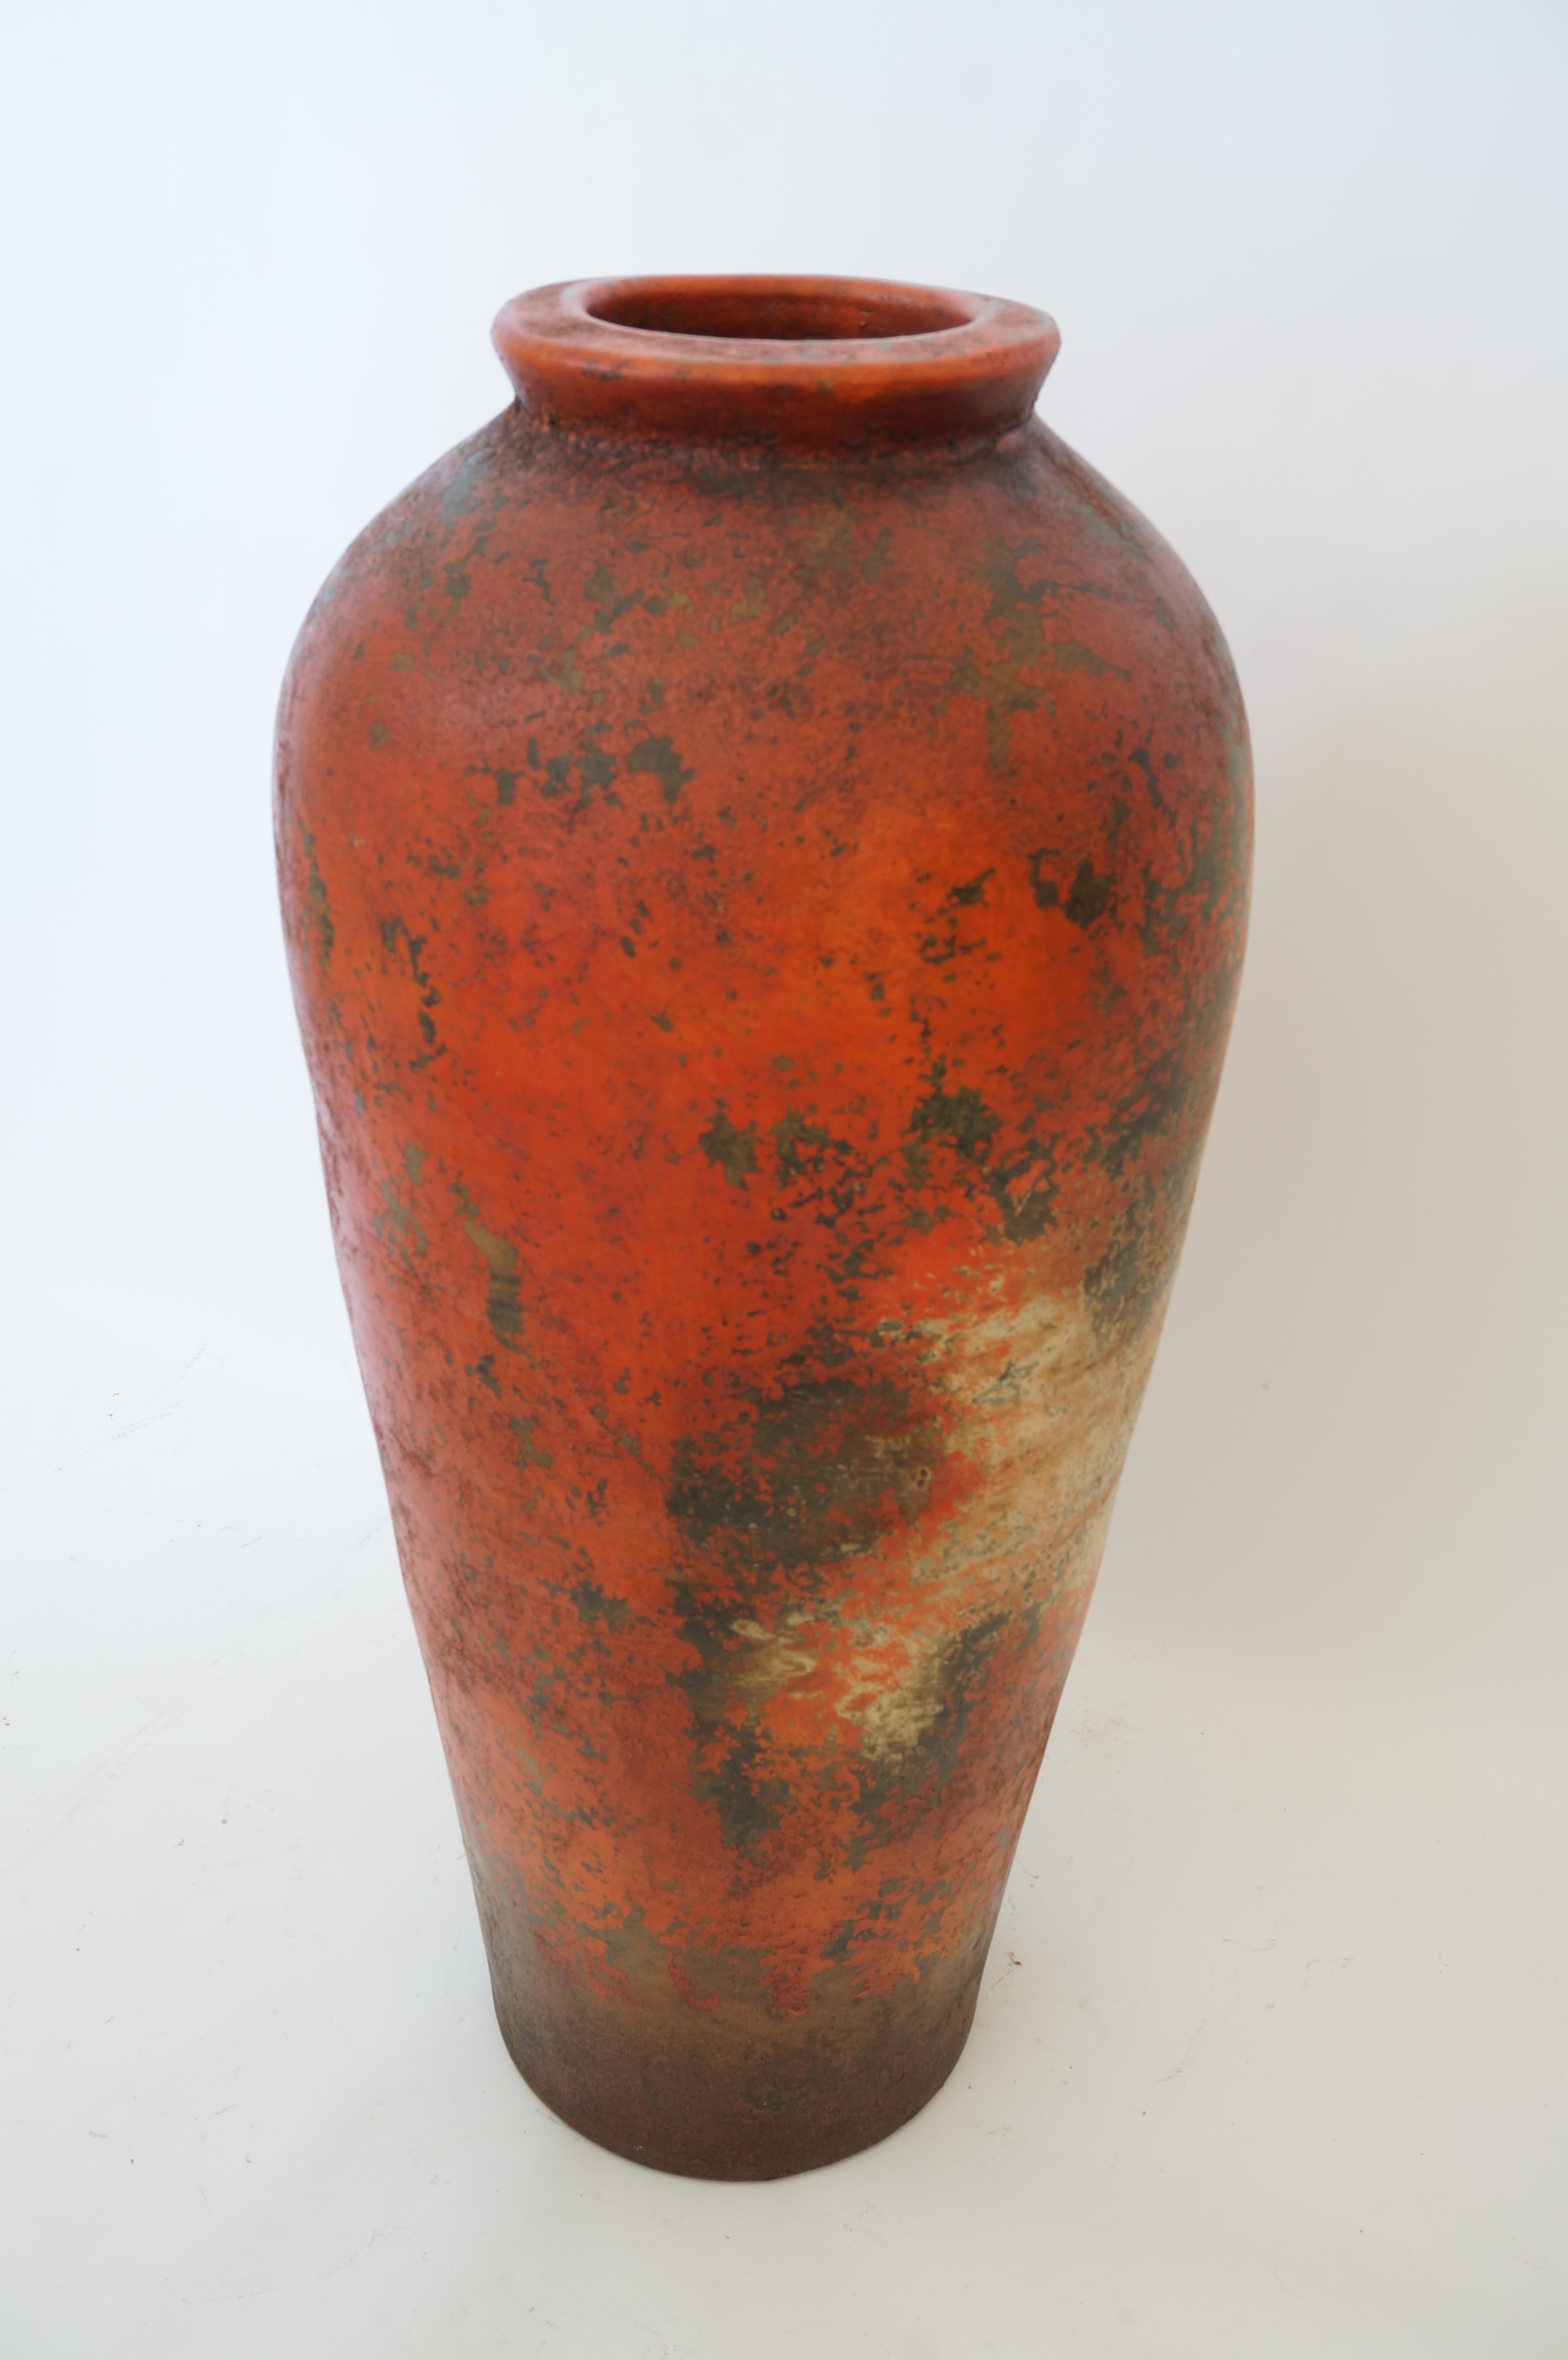 This large scale glazed terracotta floor vase dates to the 1960s-1970s.